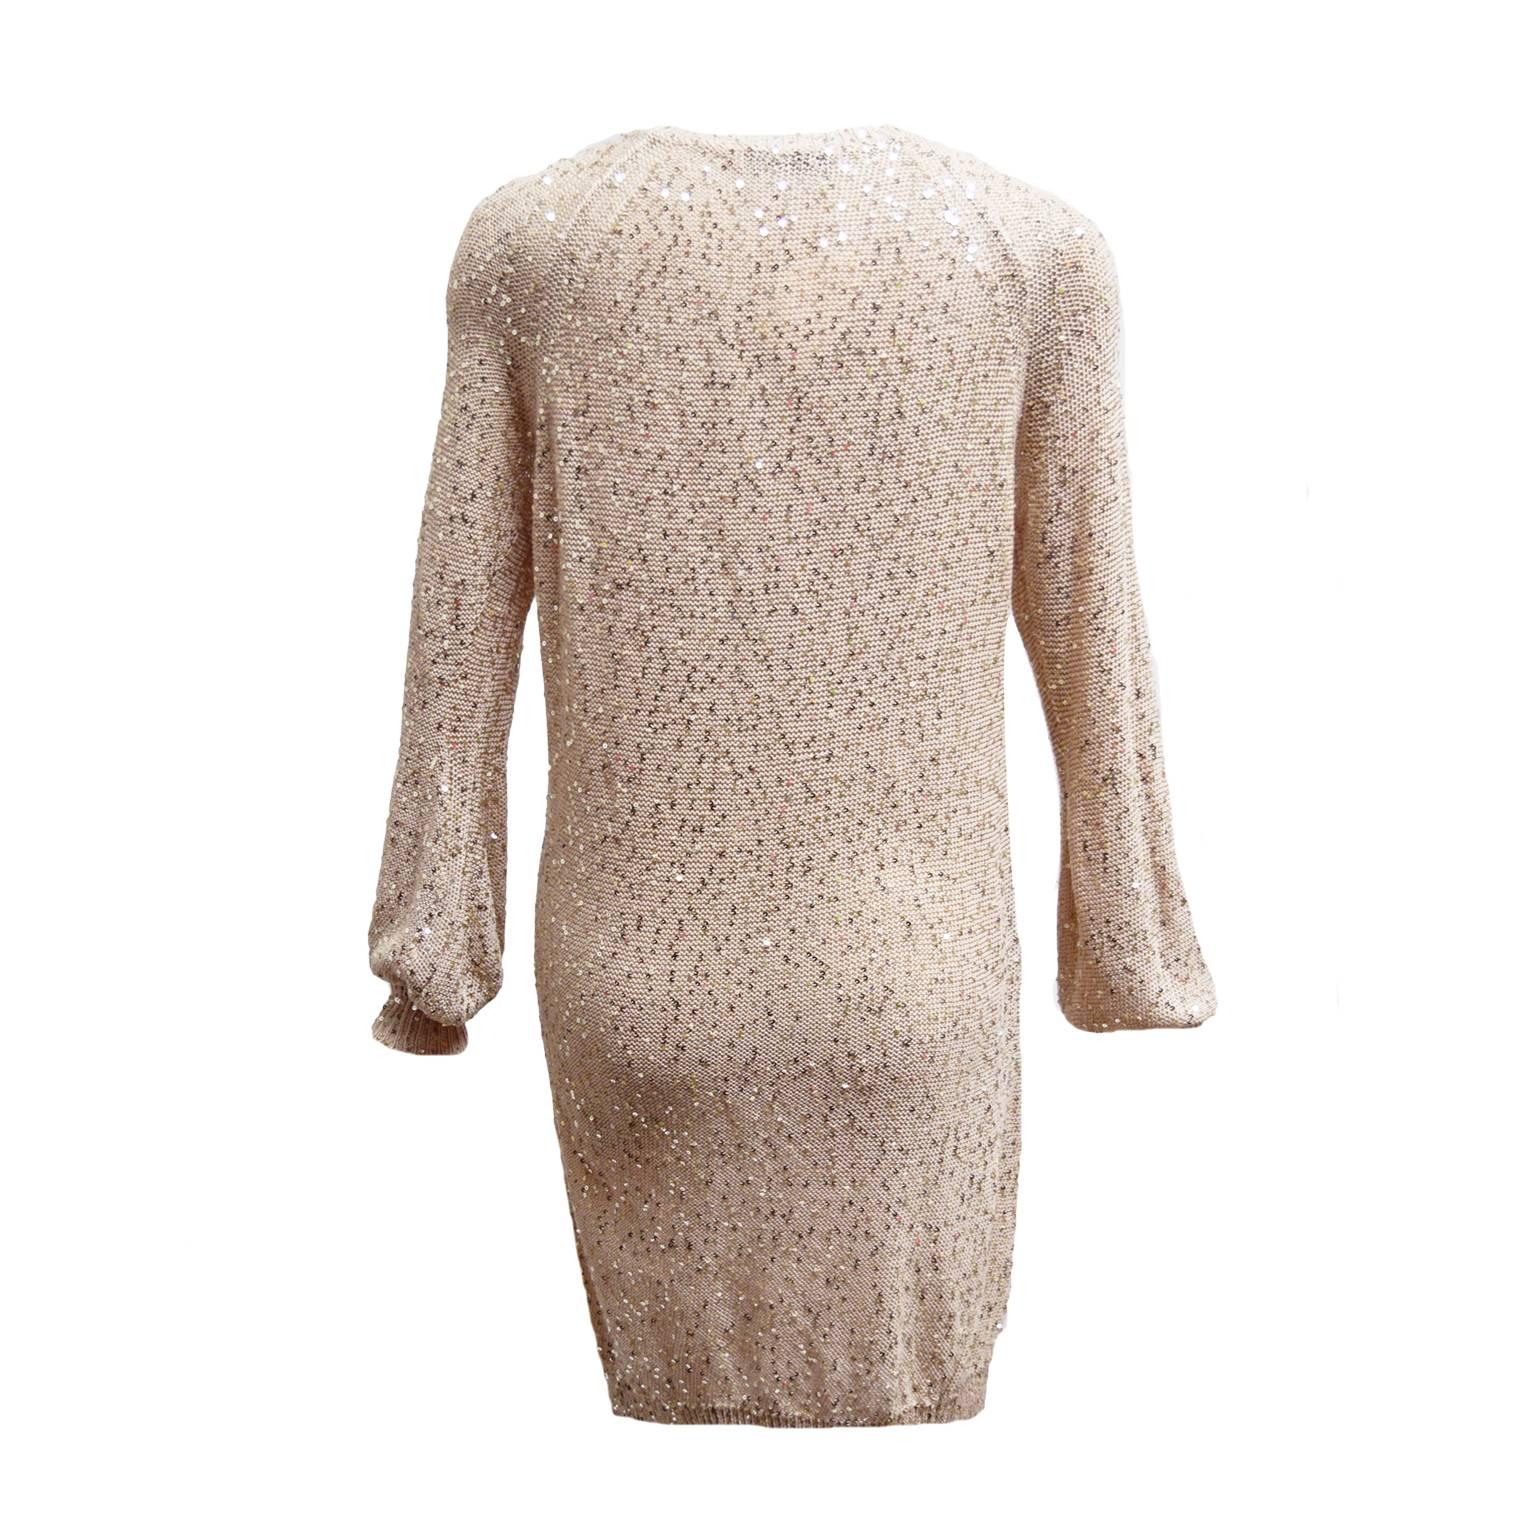 This Stella McCartney sweater dress, is a silk, wool blend and is a beautiful rich blush color. The sleeve cuffs are ribbed and all over the dress are hand sewn metallic silver sequin embellishments.  